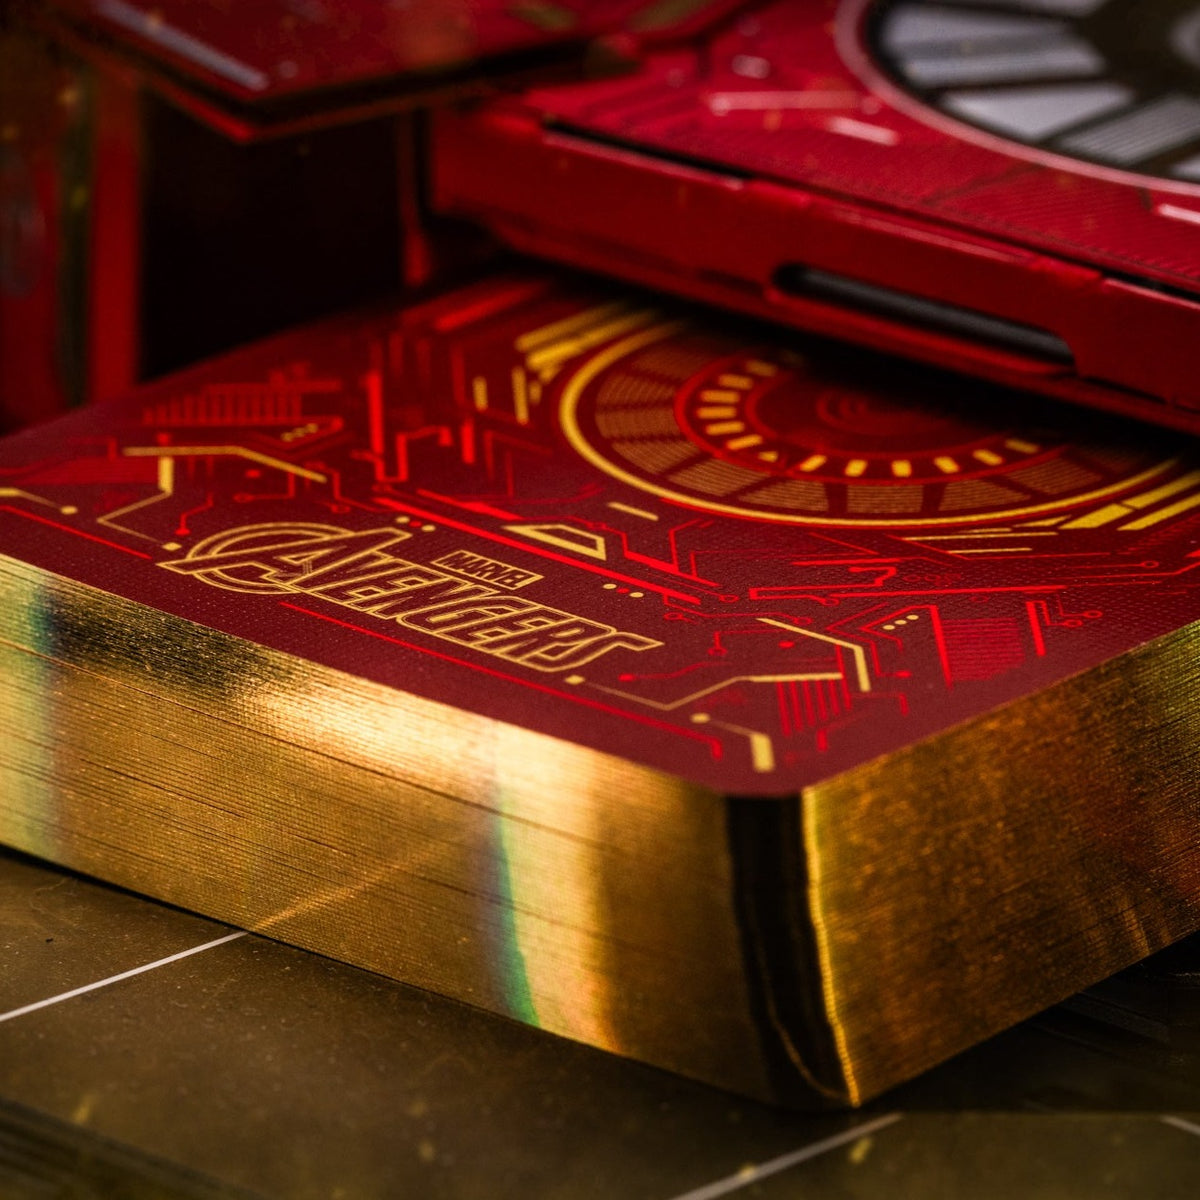 Iron Man Civil War Mk 46 Gilded Editions Playing Cards by Card Mafia